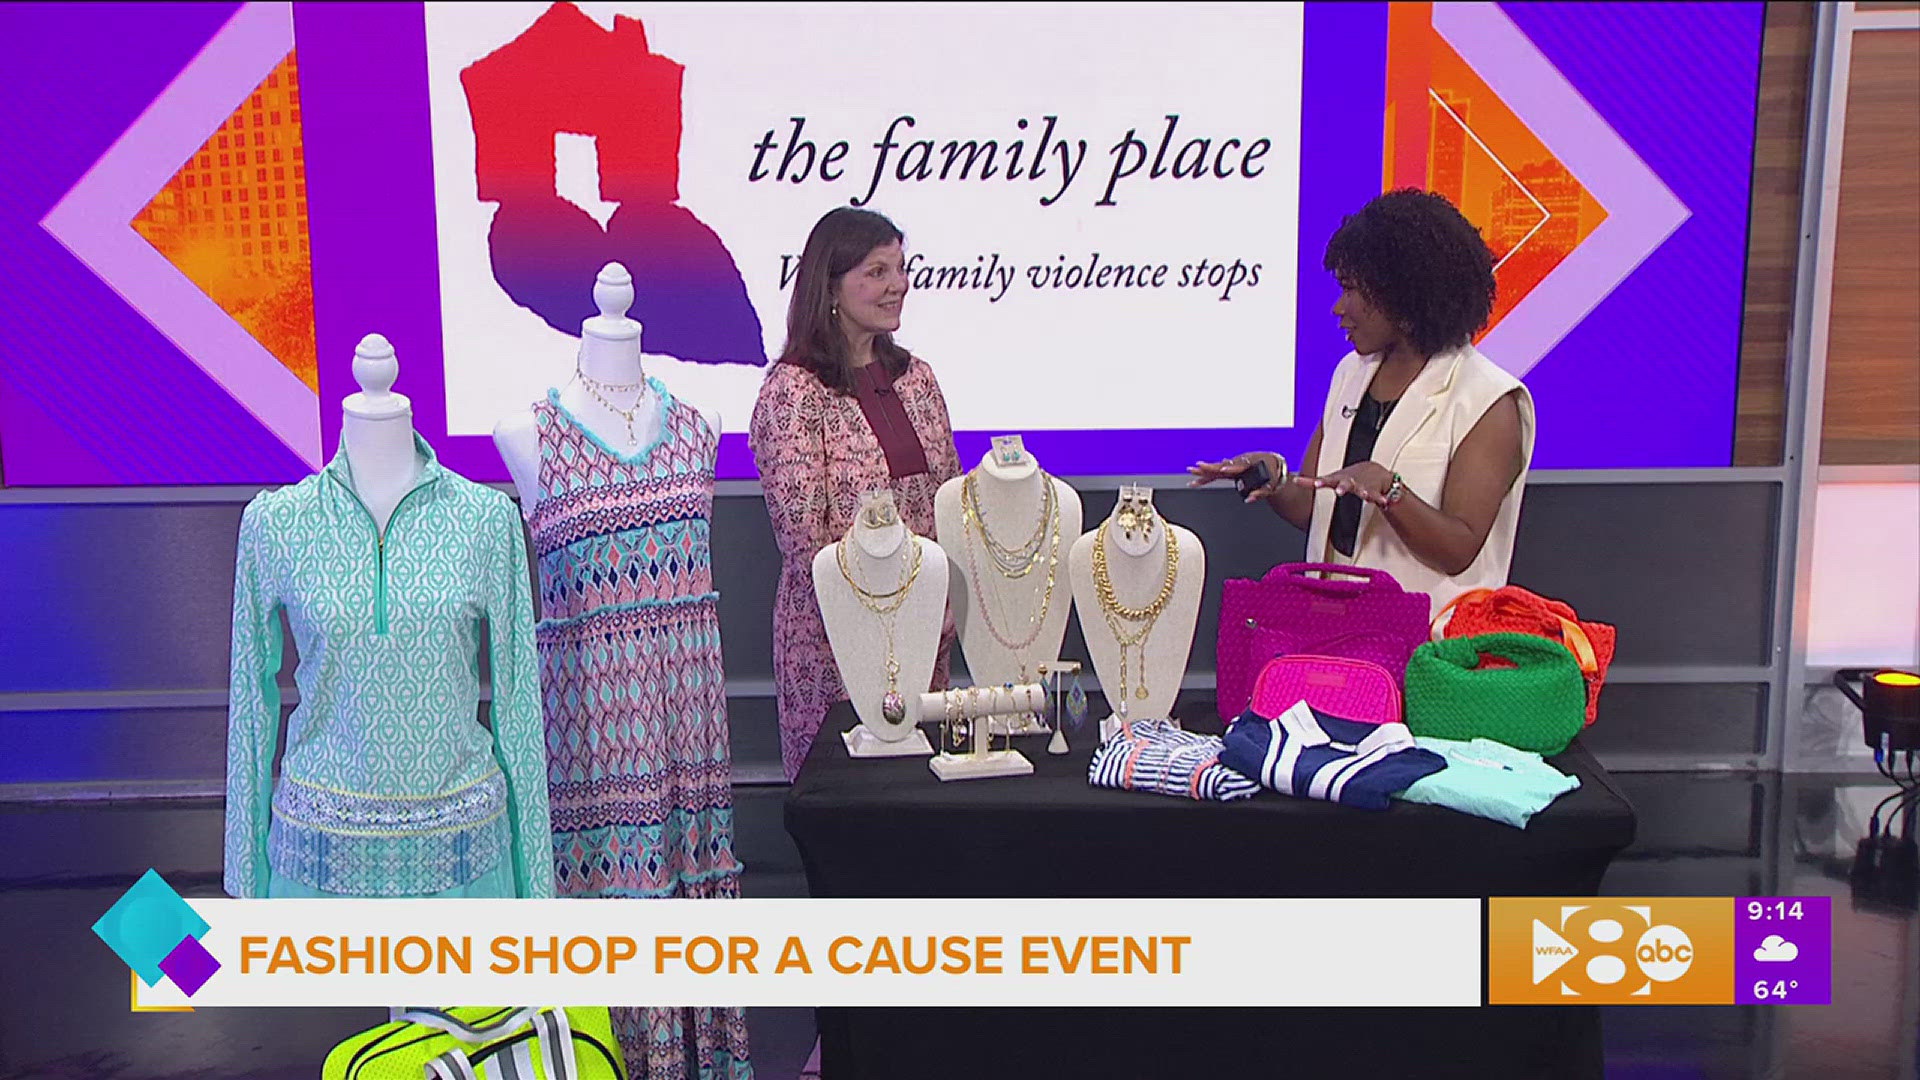 Three brands come together to host a shopping event with up to 70% off products with proceeds benefitting The Family Place April 30-May 2.